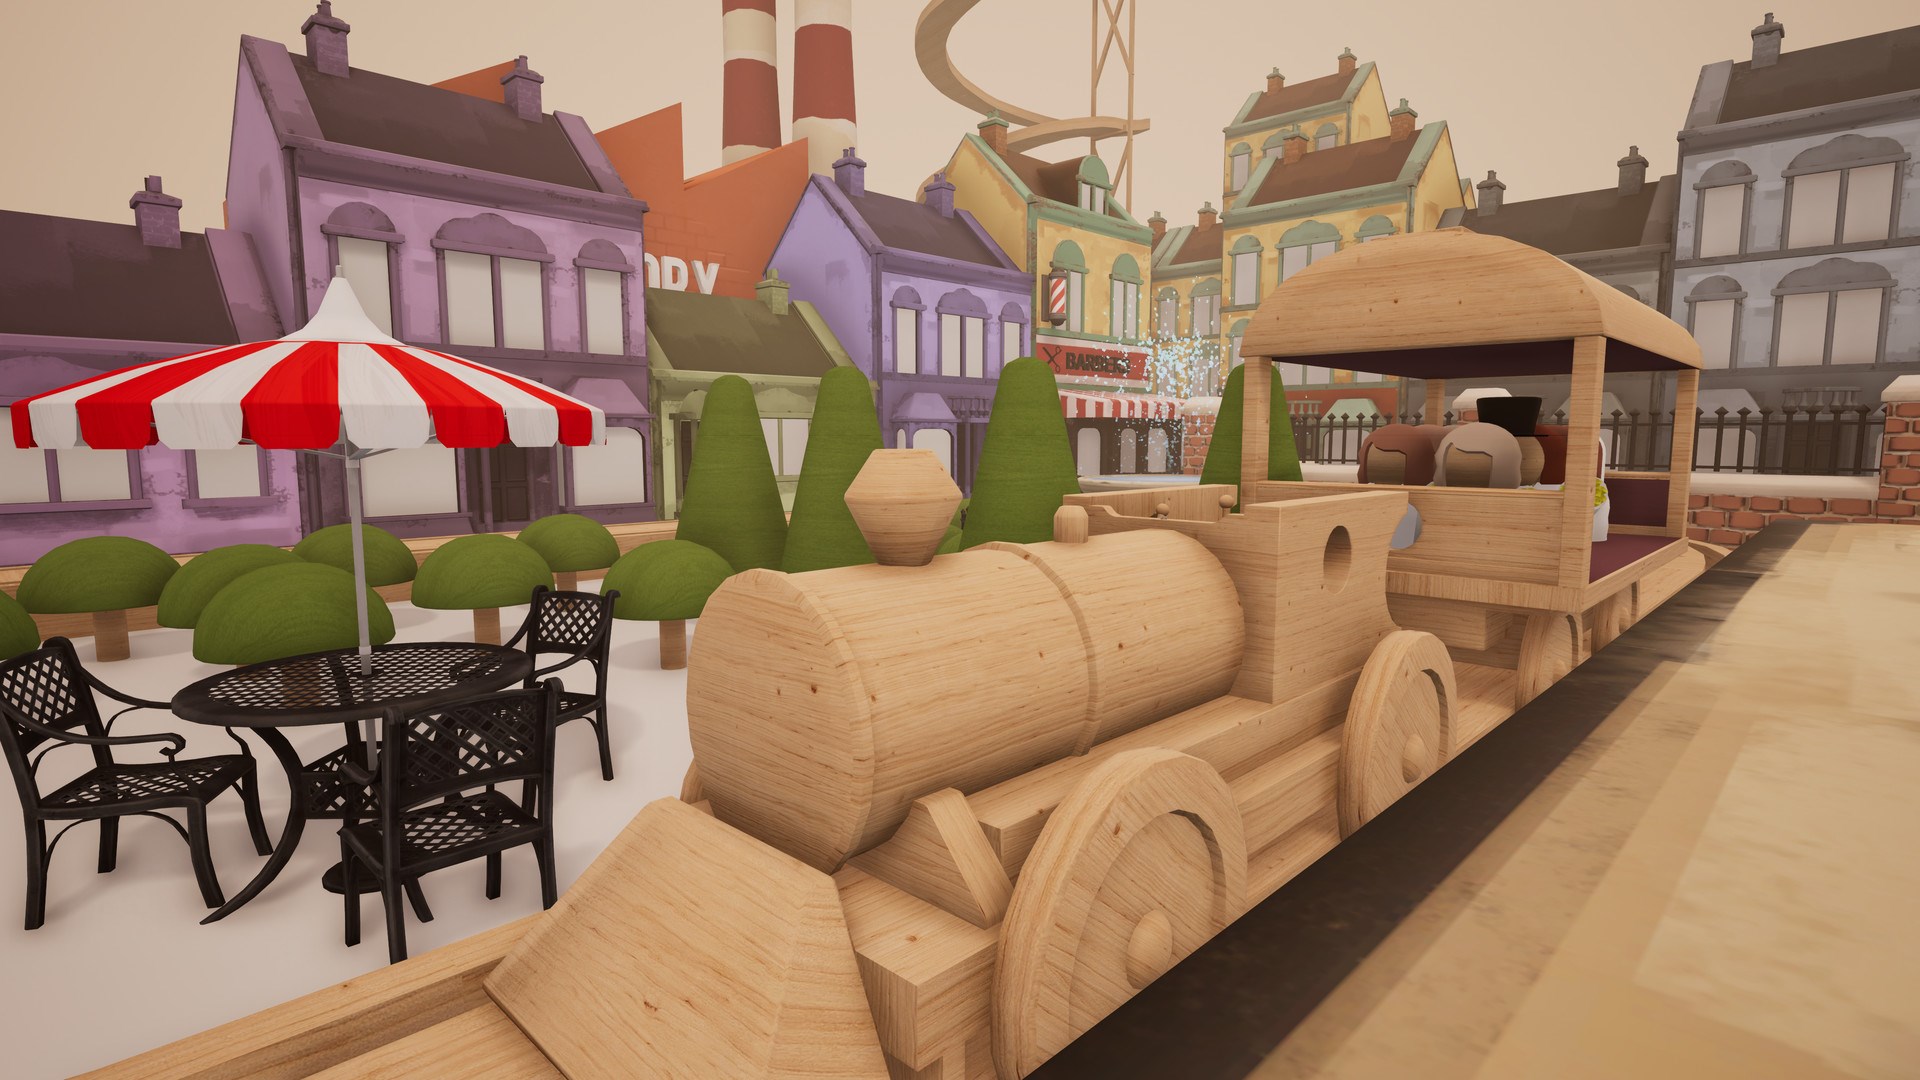 wooden train game